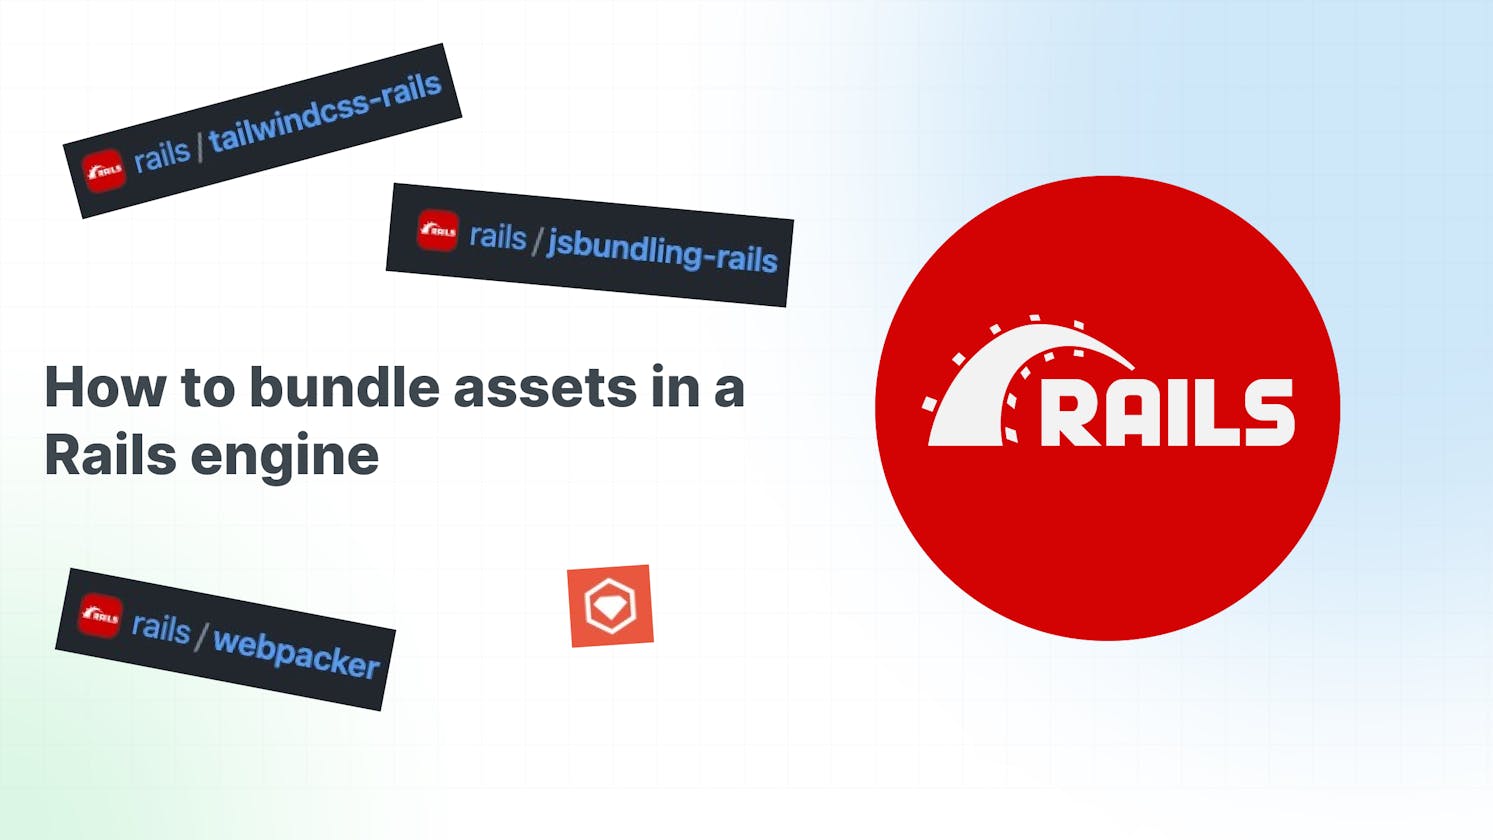 How to bundle assets in a Rails engine